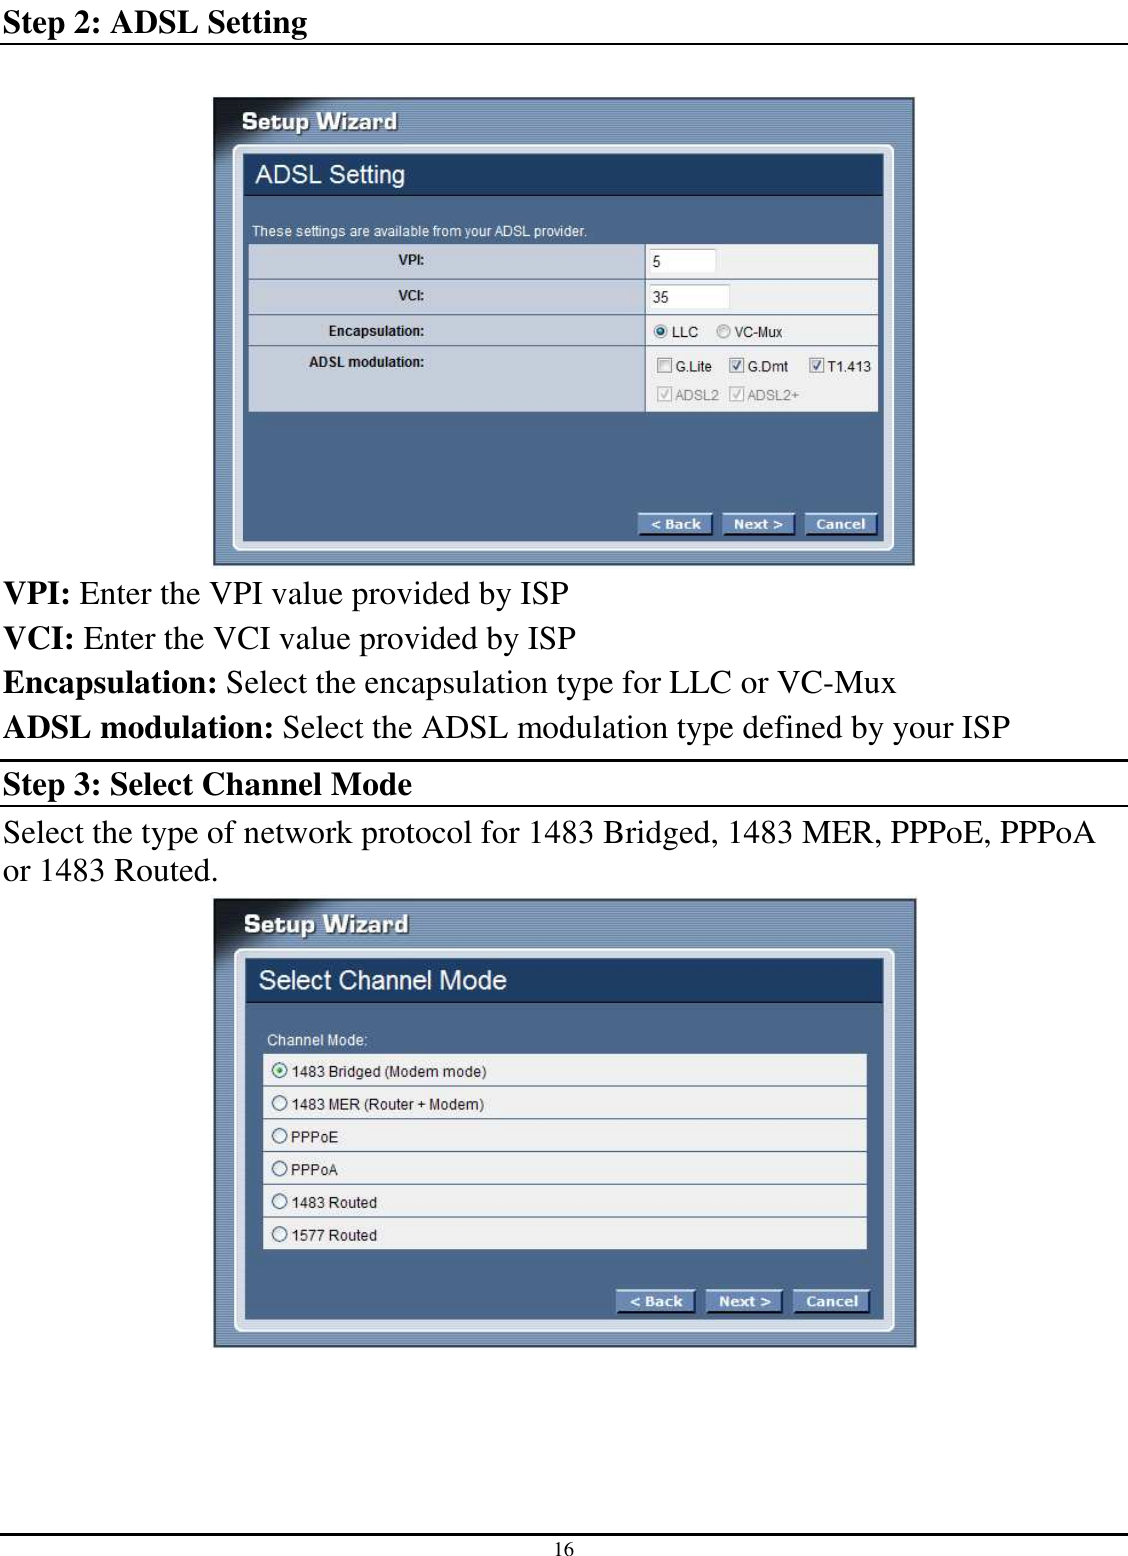 16 Step 2: ADSL Setting   VPI: Enter the VPI value provided by ISP VCI: Enter the VCI value provided by ISP Encapsulation: Select the encapsulation type for LLC or VC-Mux ADSL modulation: Select the ADSL modulation type defined by your ISP Step 3: Select Channel Mode Select the type of network protocol for 1483 Bridged, 1483 MER, PPPoE, PPPoA or 1483 Routed.   